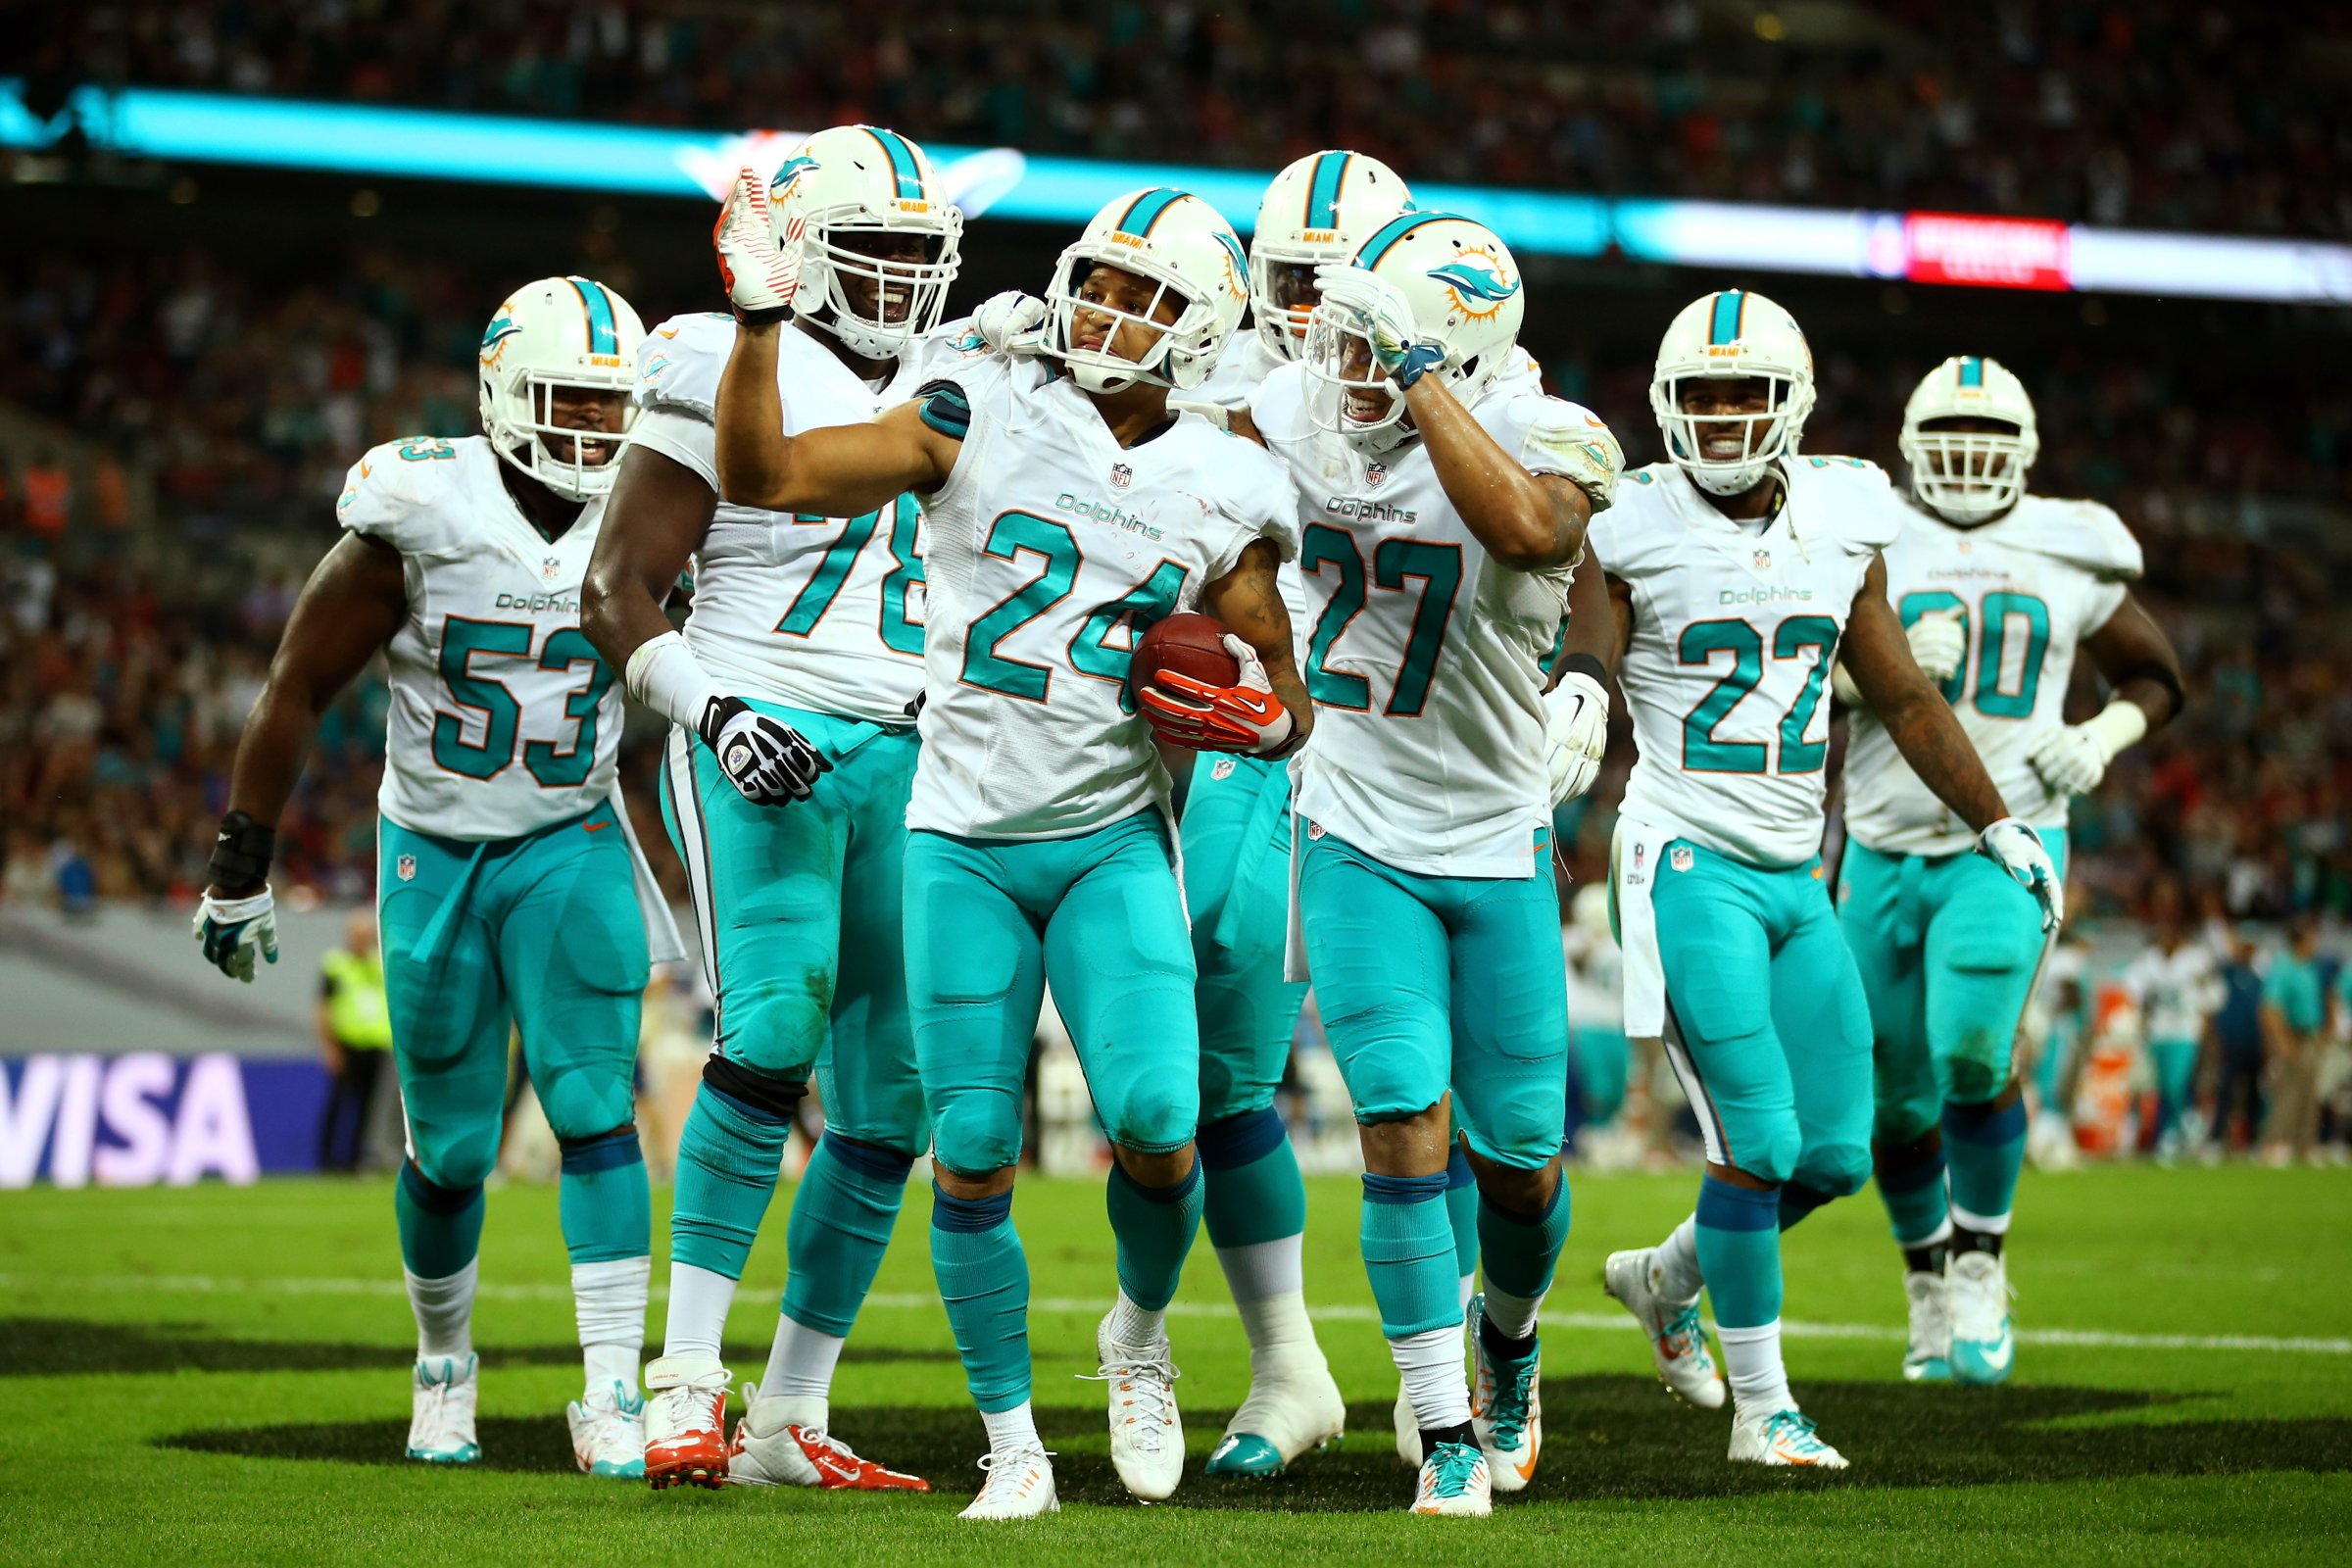 Cortland Finnegan of the Miami Dolphins celebrates with teammates after returning a fumble 50 yards to score a touchdown during the NFL match between the Oakland Raiders and the Miami Dolphins at Wembley Stadium on Sept. 28, 2014 in London,